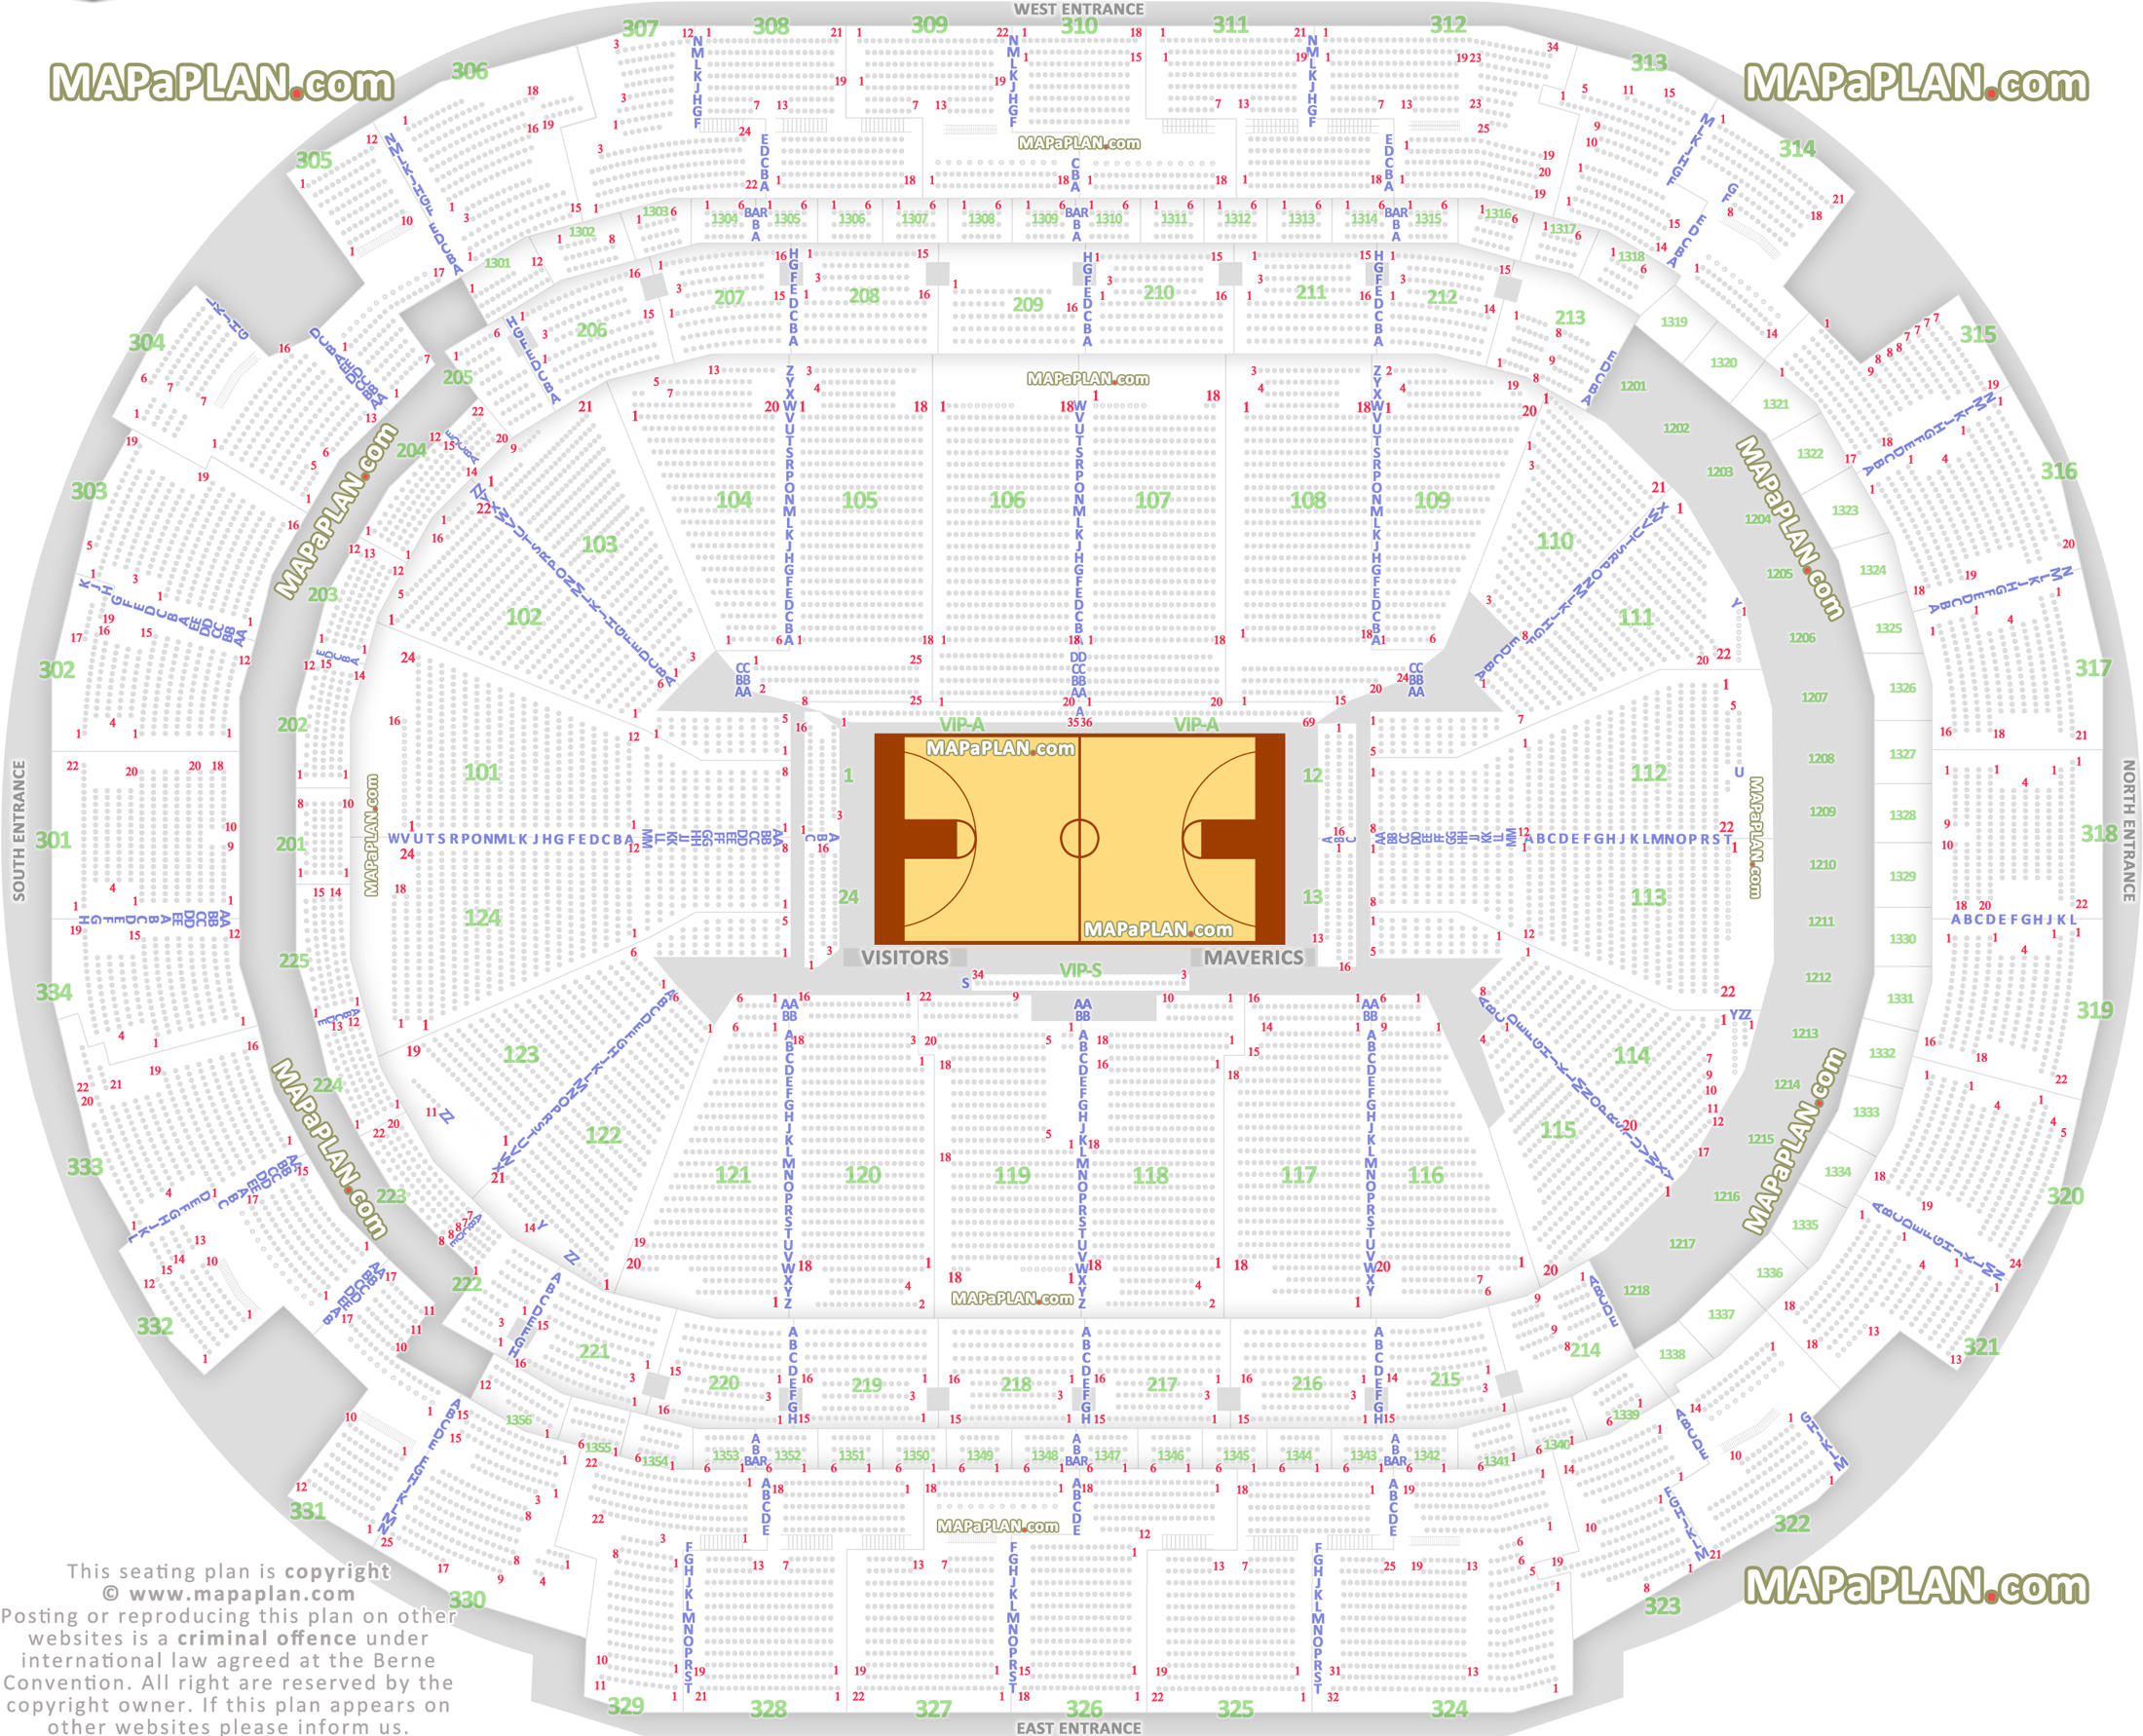 Detailed Seating Chart American Airlines Center Dallas